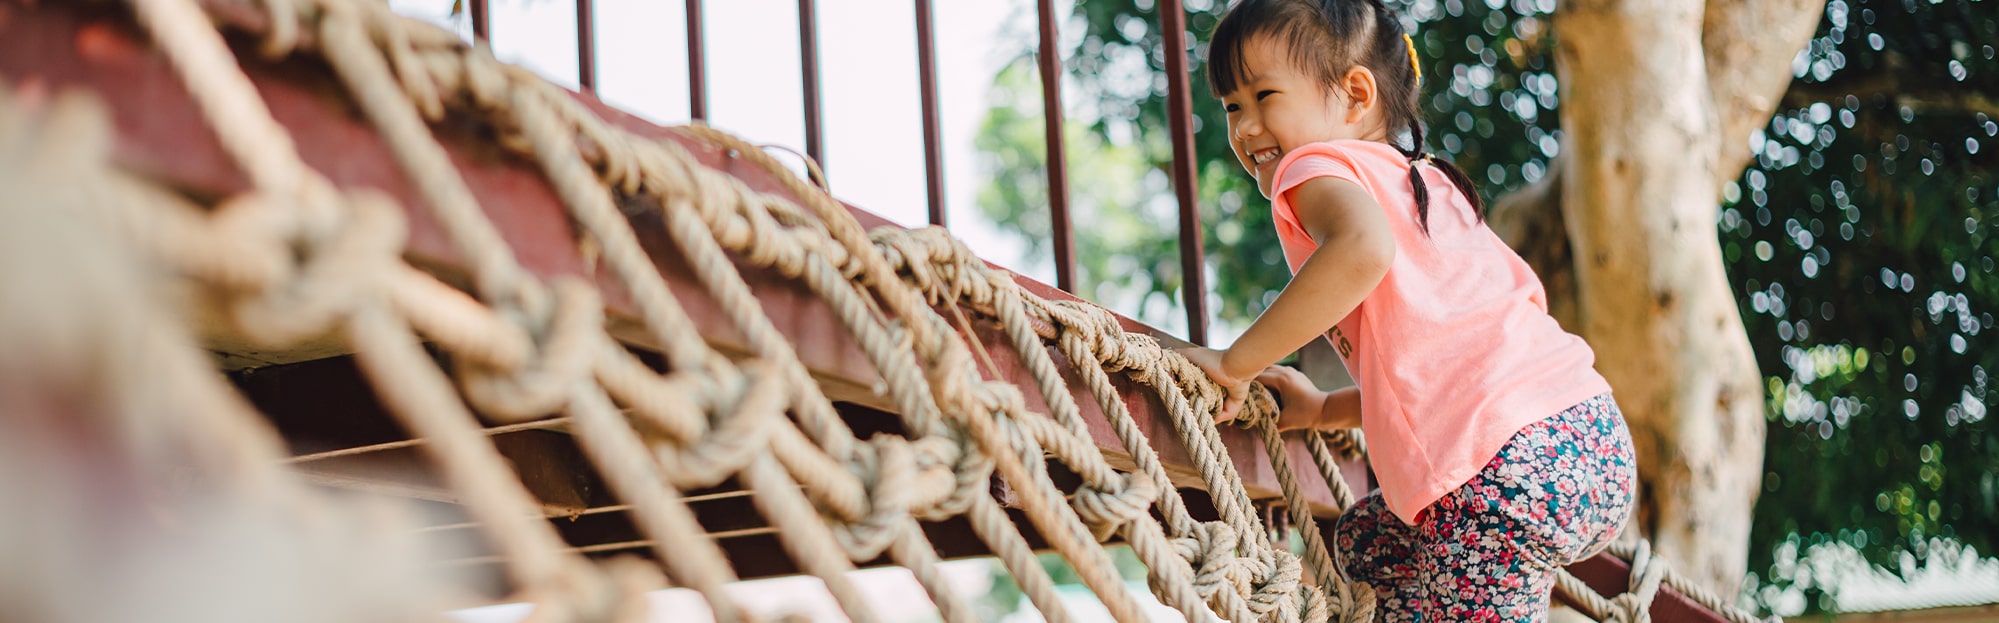 Happy little girl climbing a jungle gym rope